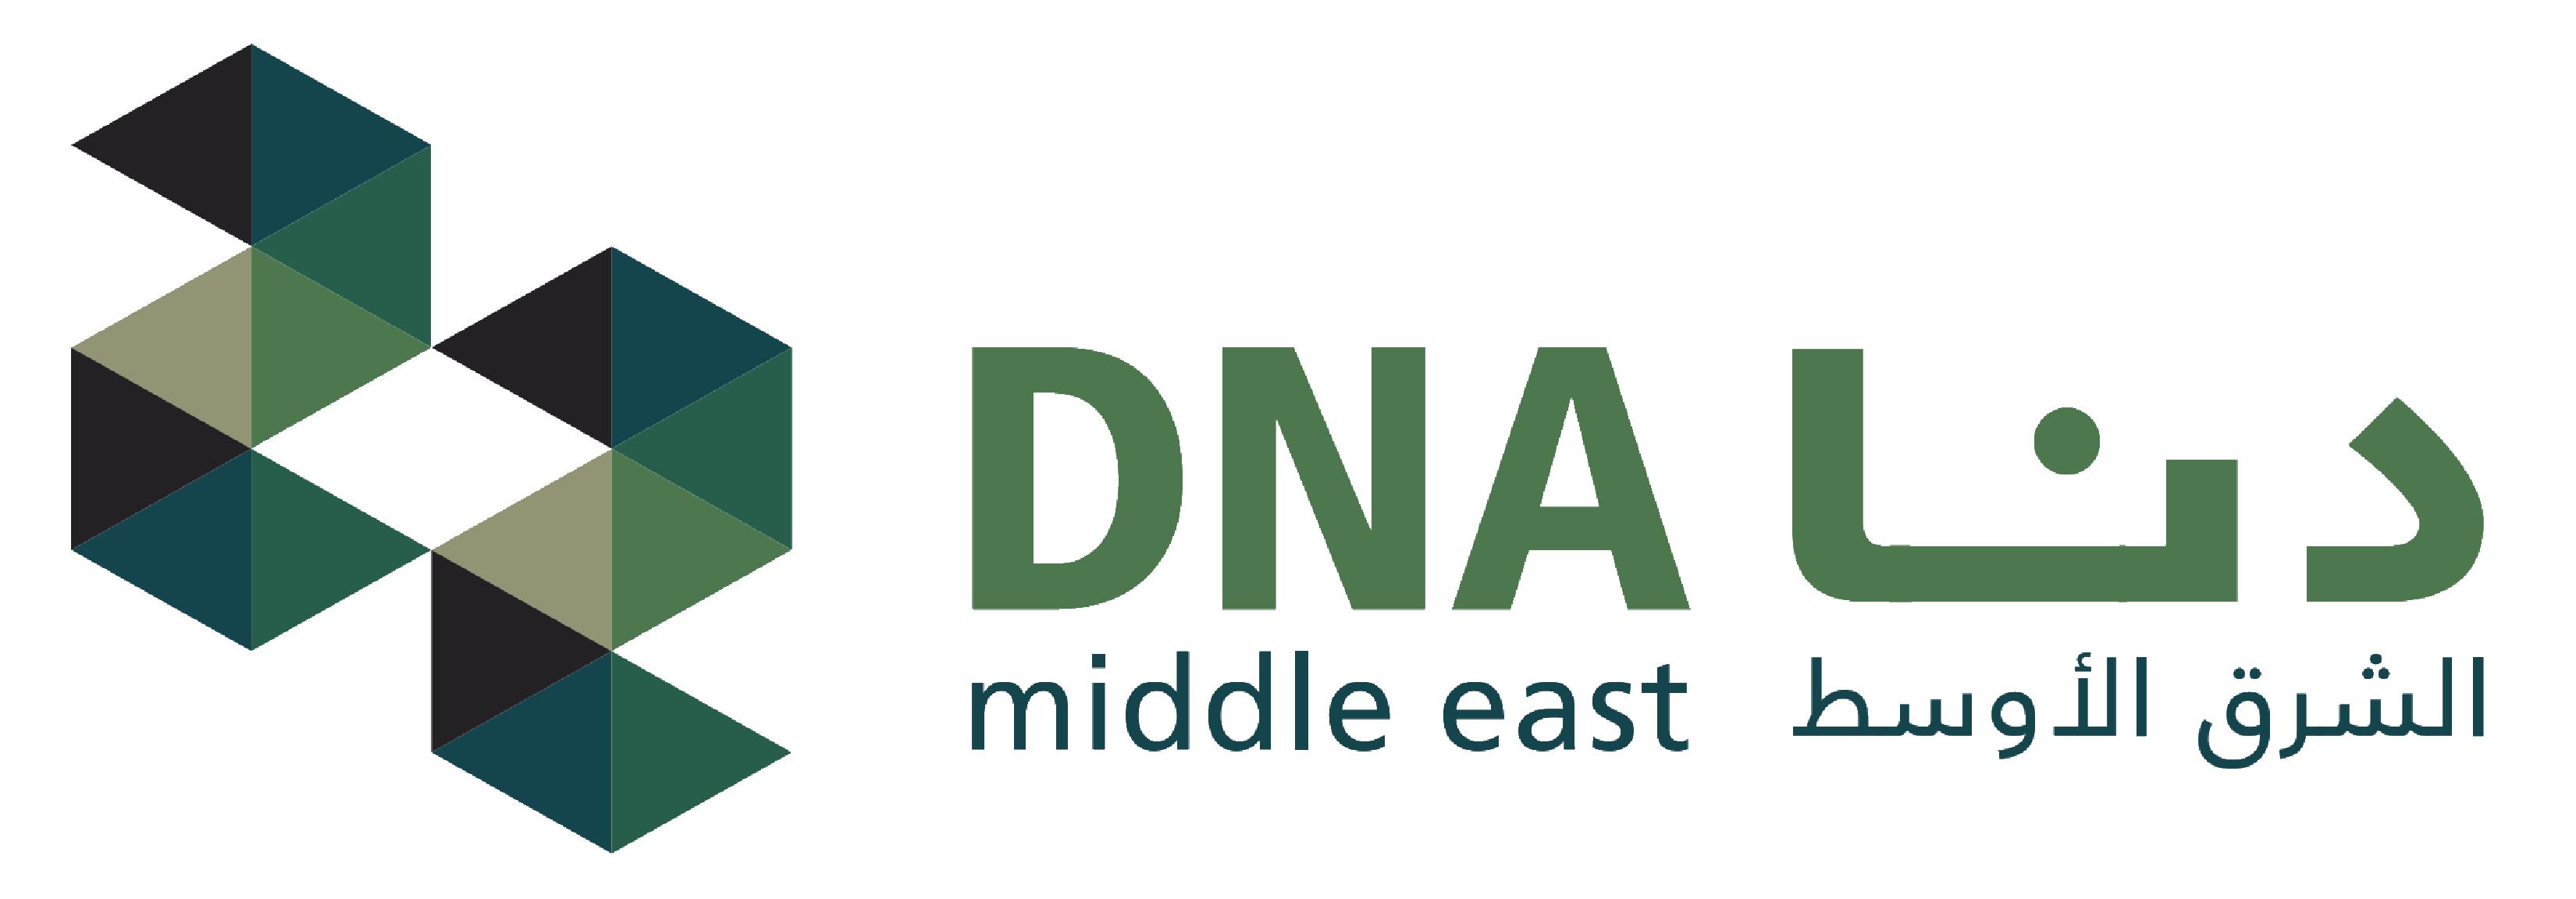 DNA Middle East | We improve lives, We improve clinical practices